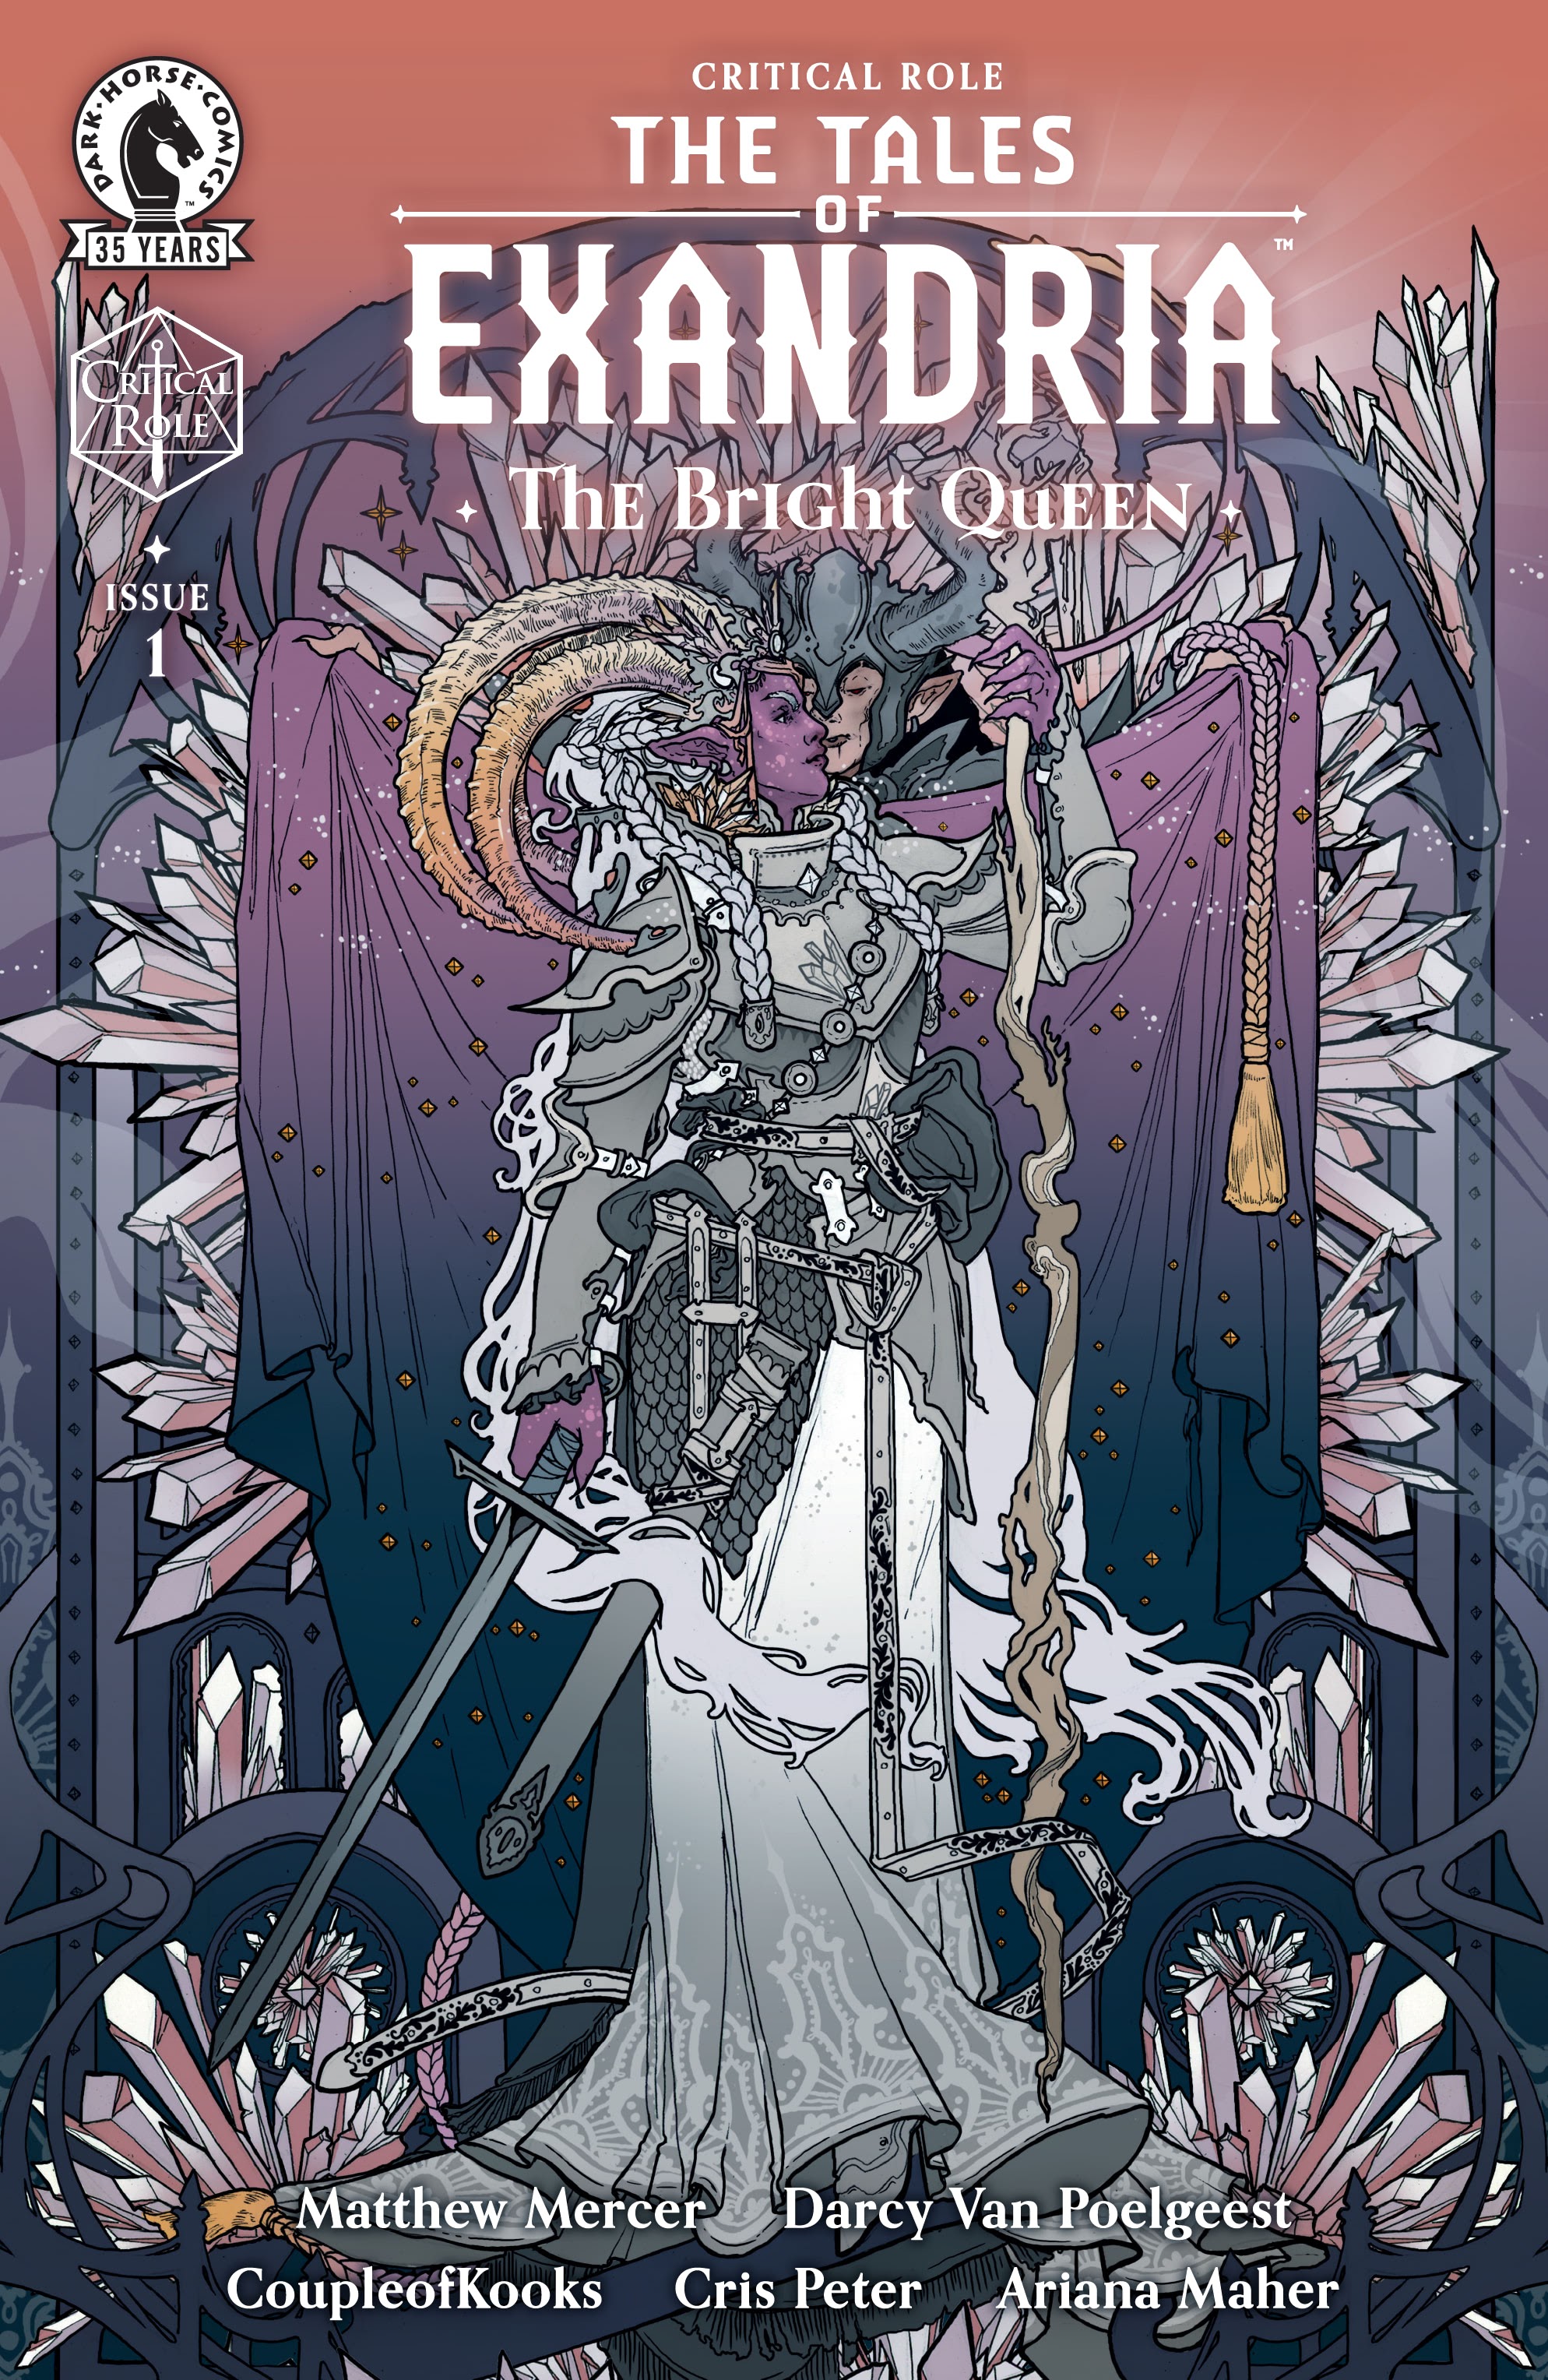 Read online Critical Role: The Tales of Exandria--The Bright Queen comic -  Issue #1 - 1